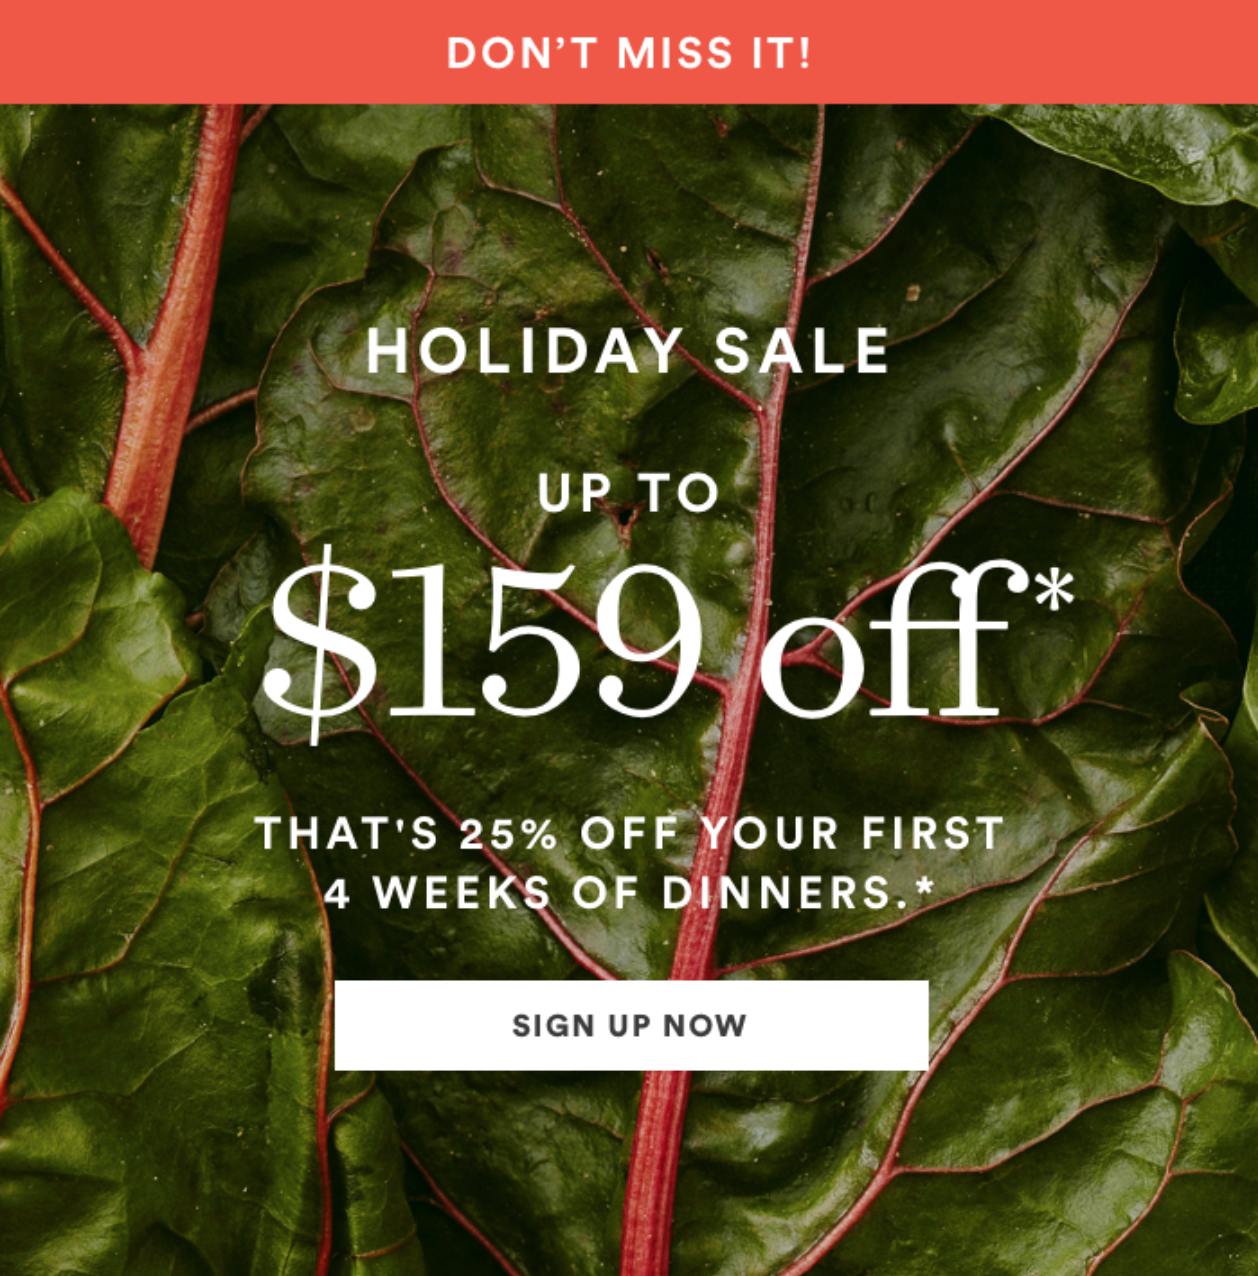 Plated Meal Kit Deal – 25% Off Your First Four Boxes!